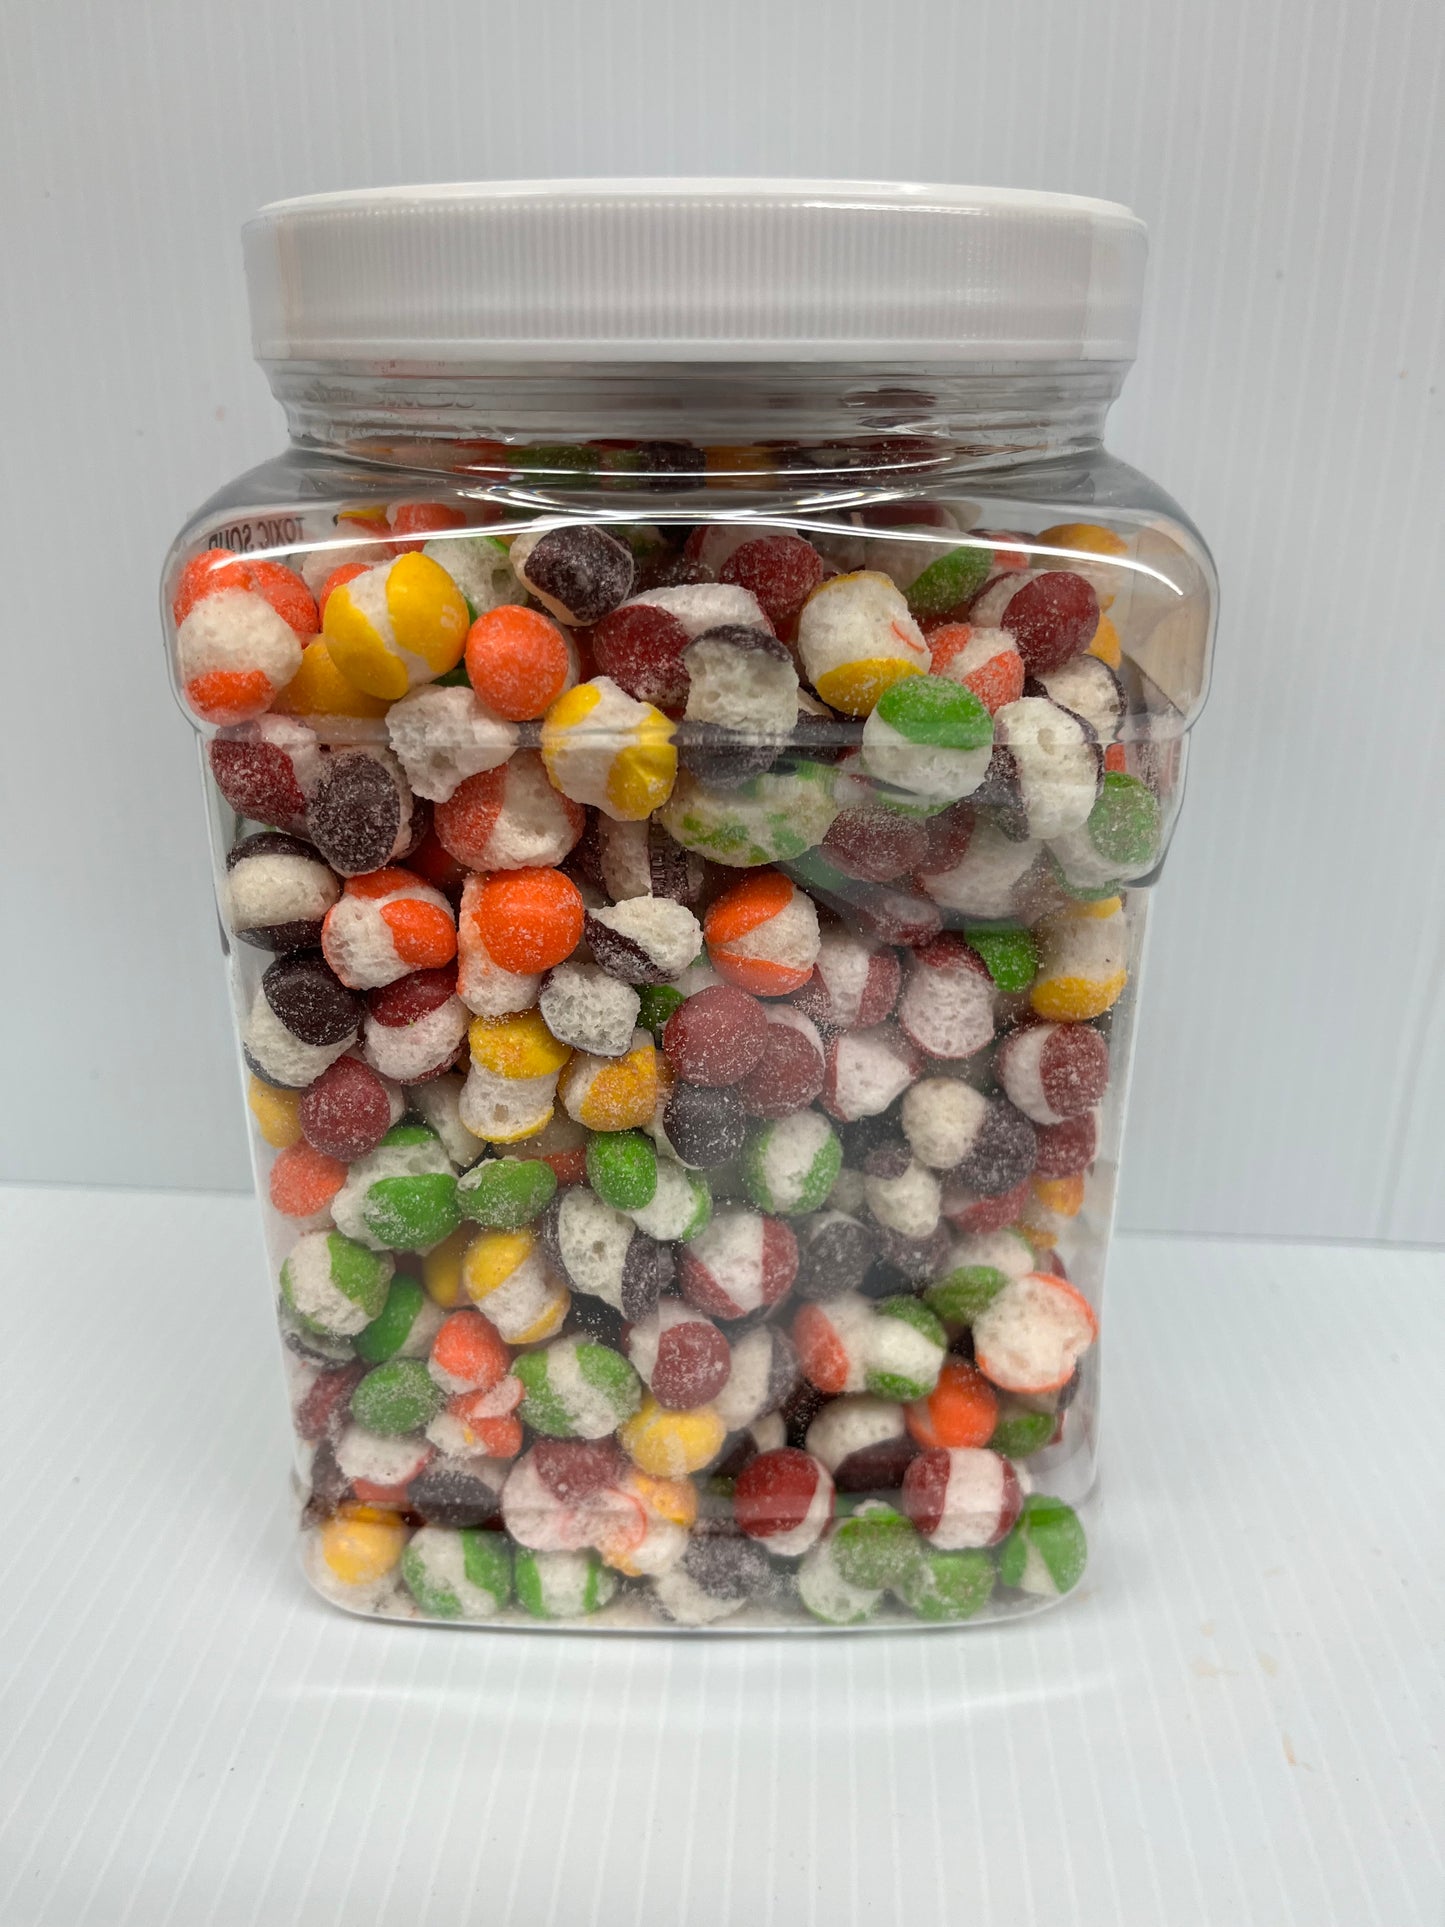 Sour Freeze Dried Skittles Sharing Tub 20 Ounces